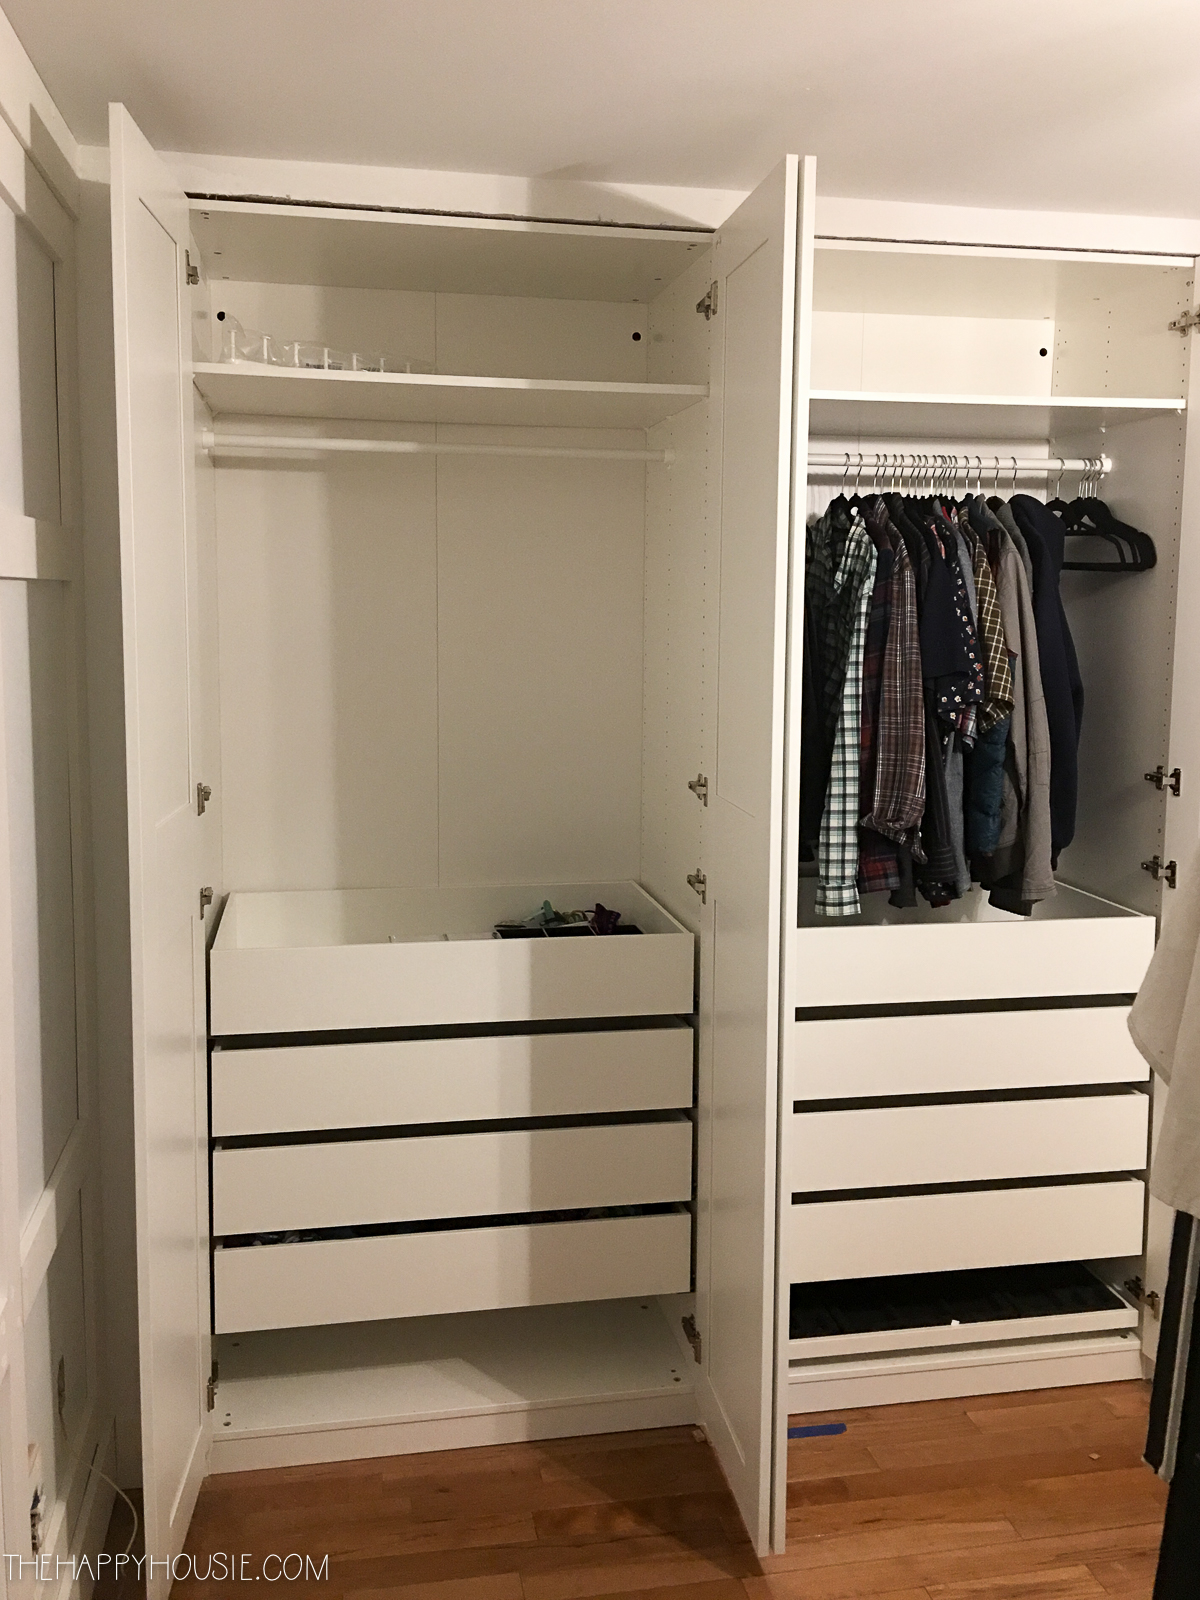 Diy An Organized Closet Big Or Small With The Ikea Pax Wardrobe System The Happy Housie